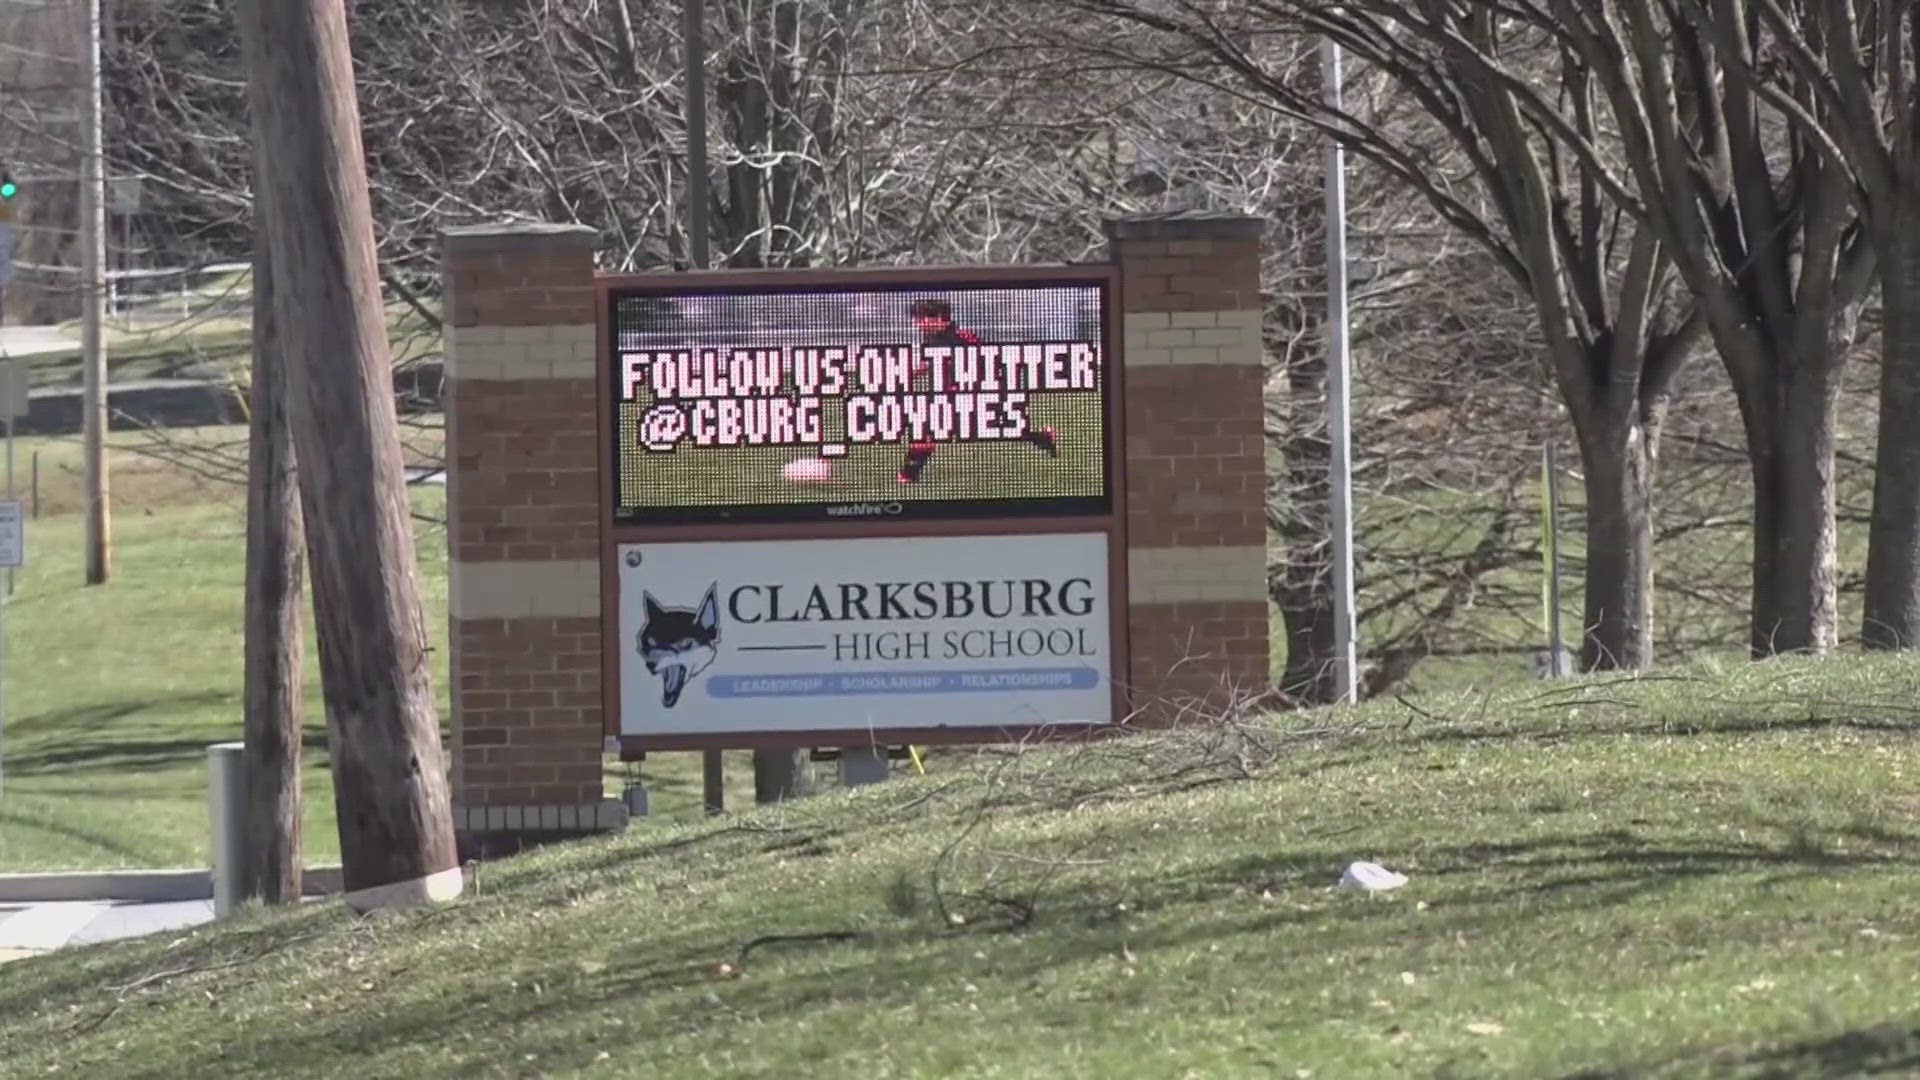 Officers were dispatched to Clarksburg High School after a student reported to security that they saw another student with a gun.